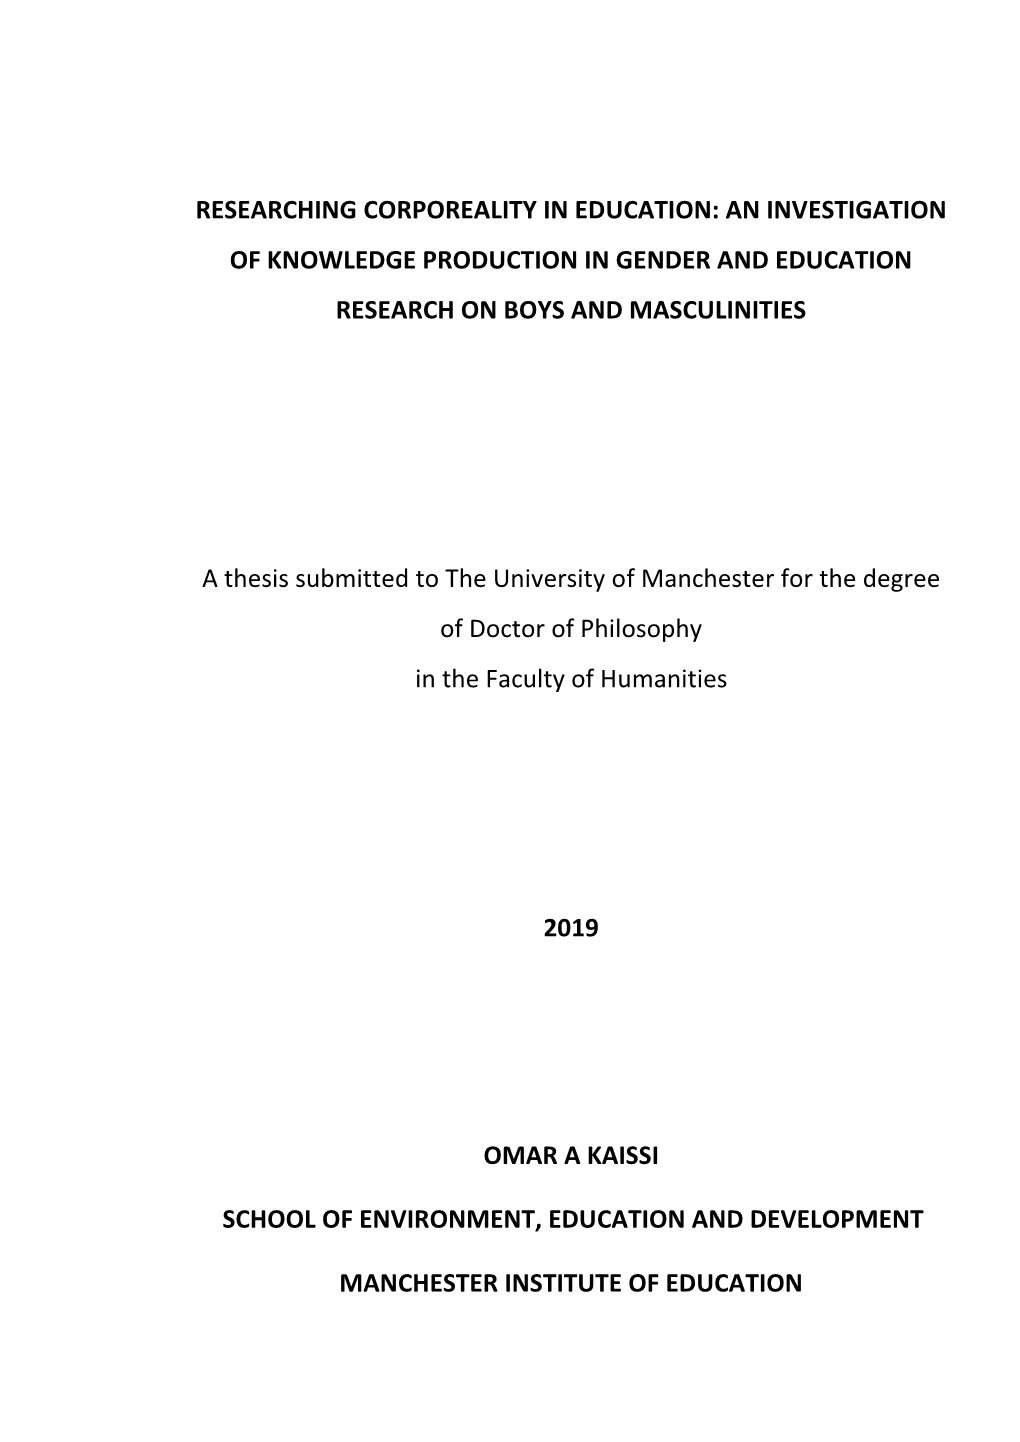 Researching Corporeality in Education: an Investigation of Knowledge Production in Gender and Education Research on Boys and Masculinities